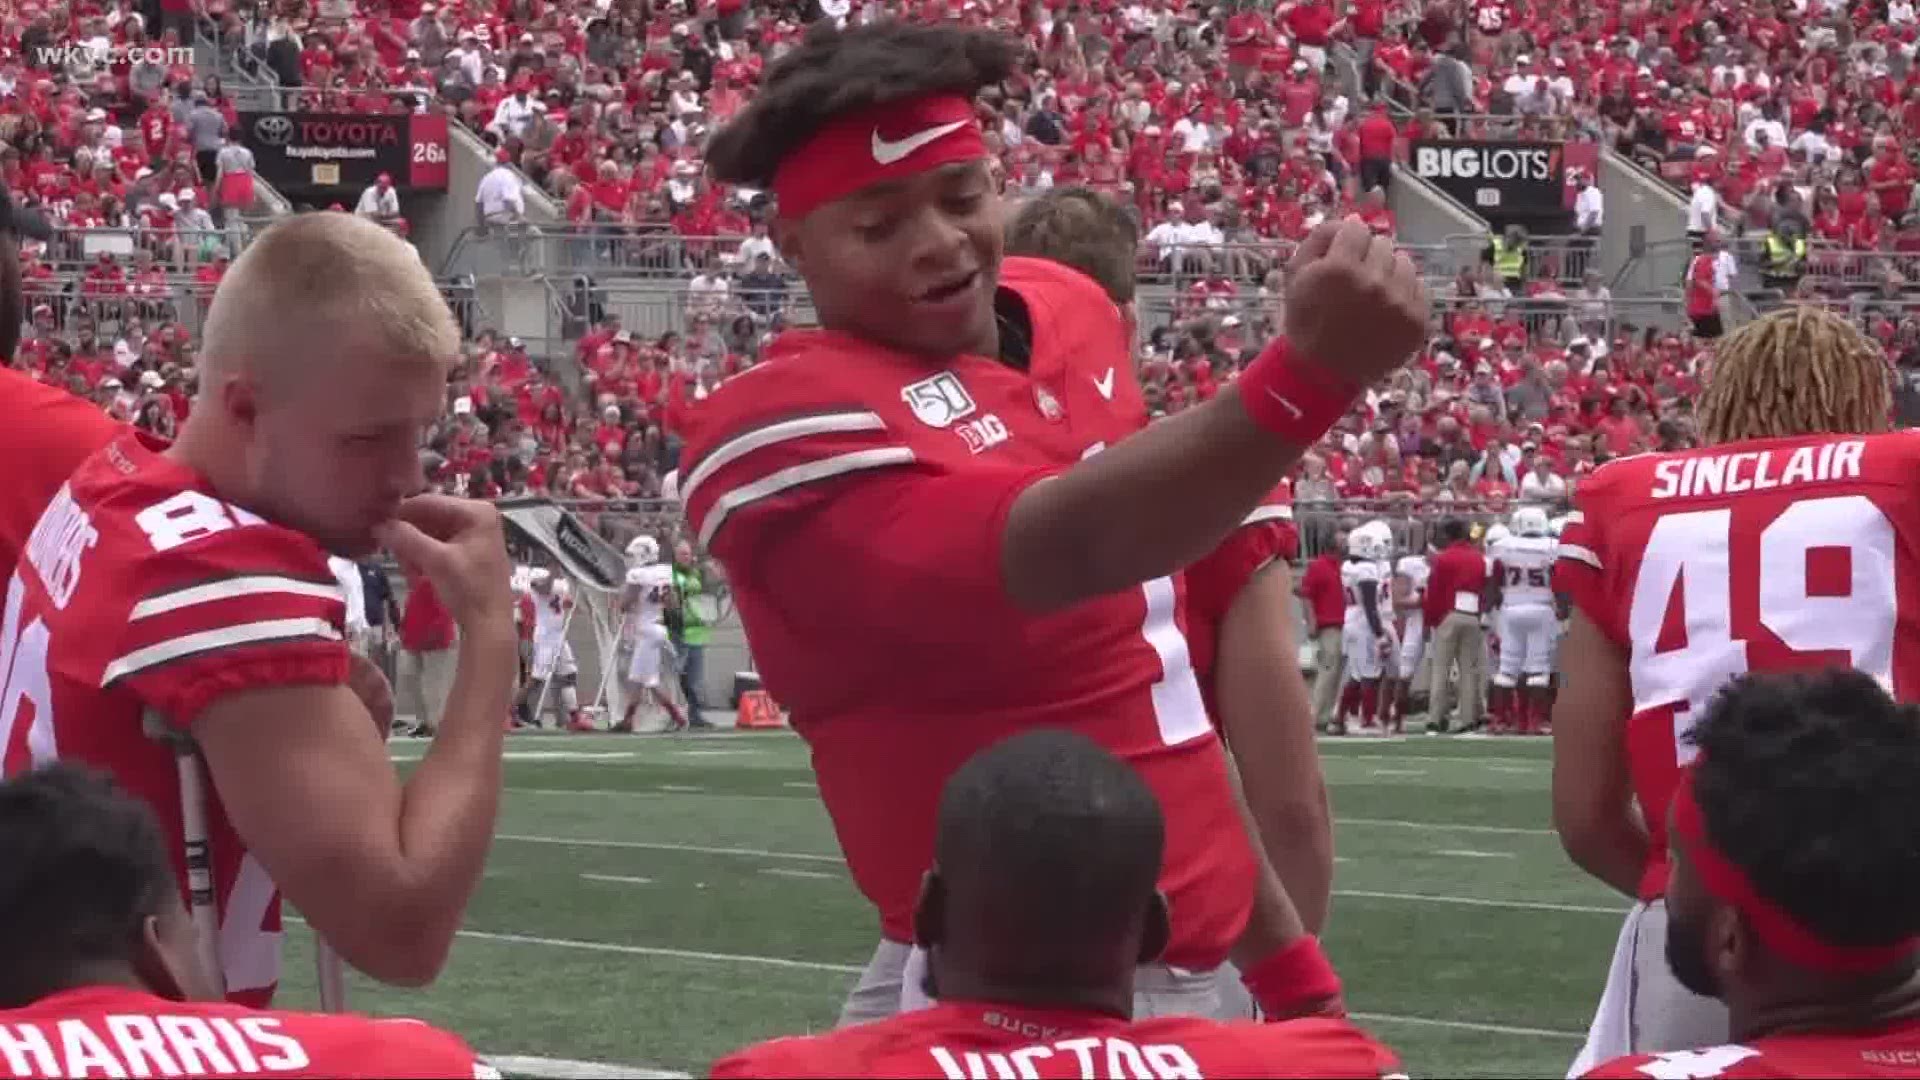 According to the NFL Network, former Ohio State quarterback Justin Fields has told NFL teams that he is managing epilepsy.